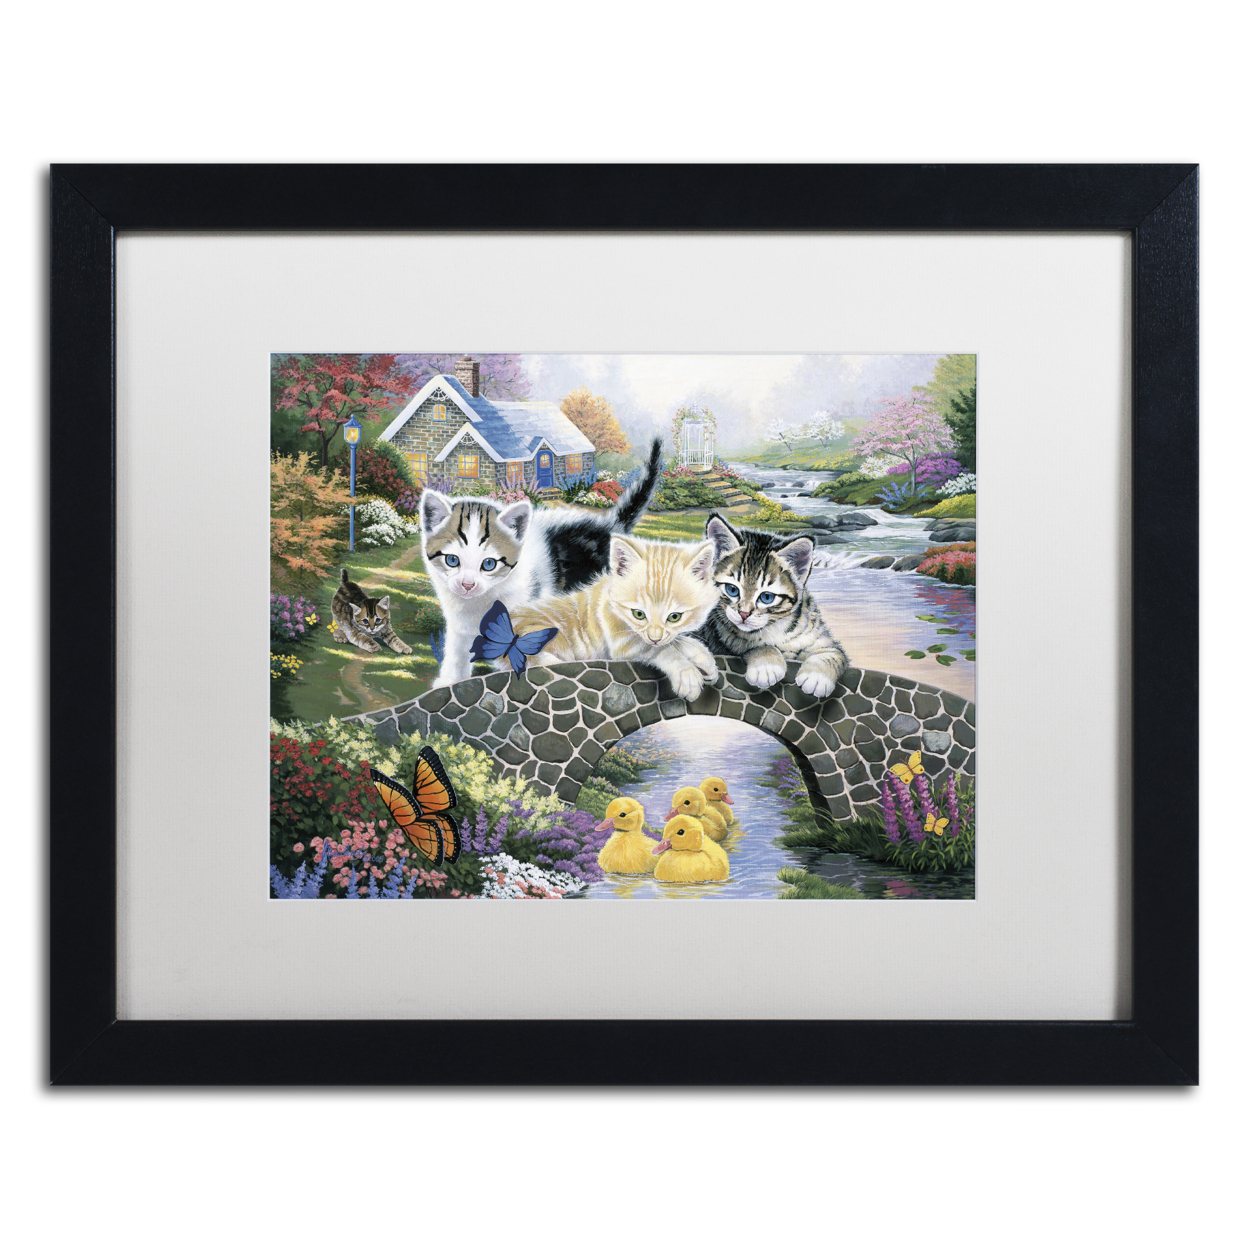 Jenny Newland 'A Purrfect Day' Black Wooden Framed Art 18 X 22 Inches